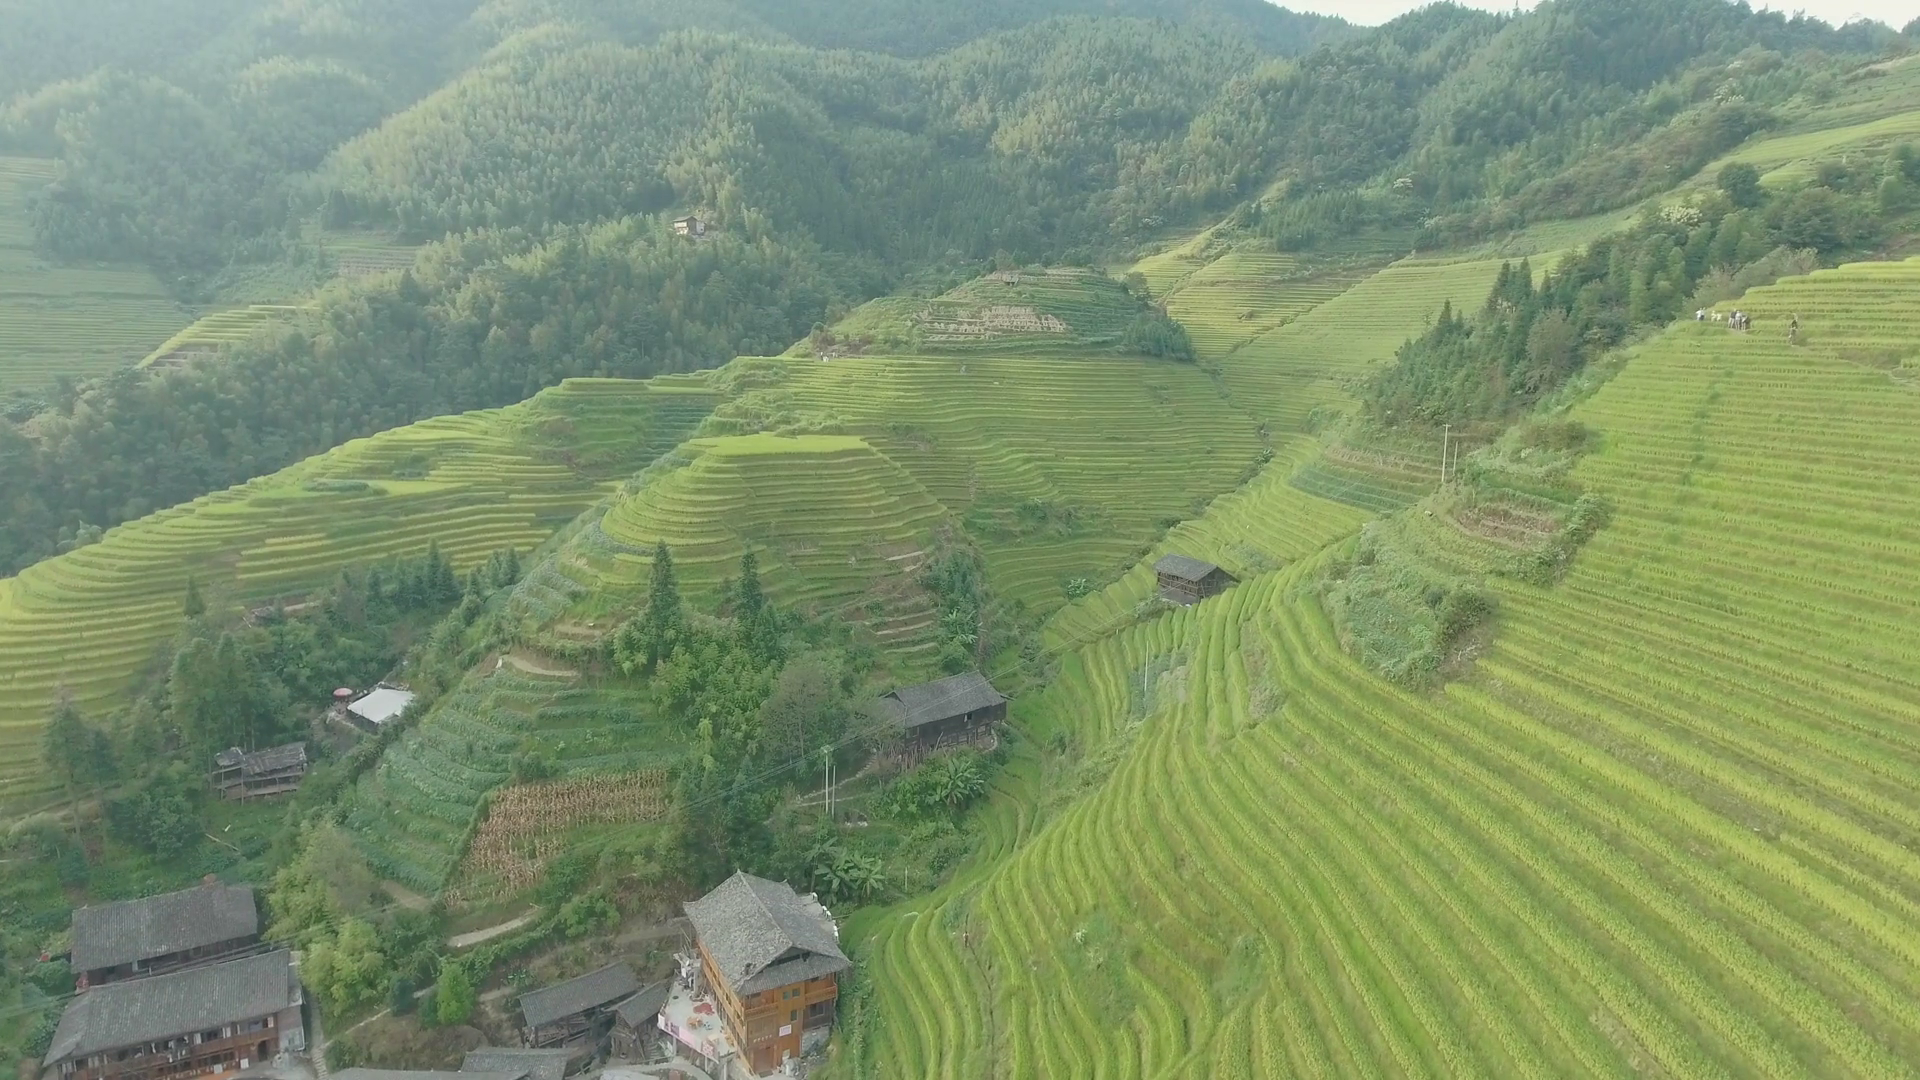 Beautiful 4k aerial sgot of the Longji Rice Terraces located next to ...